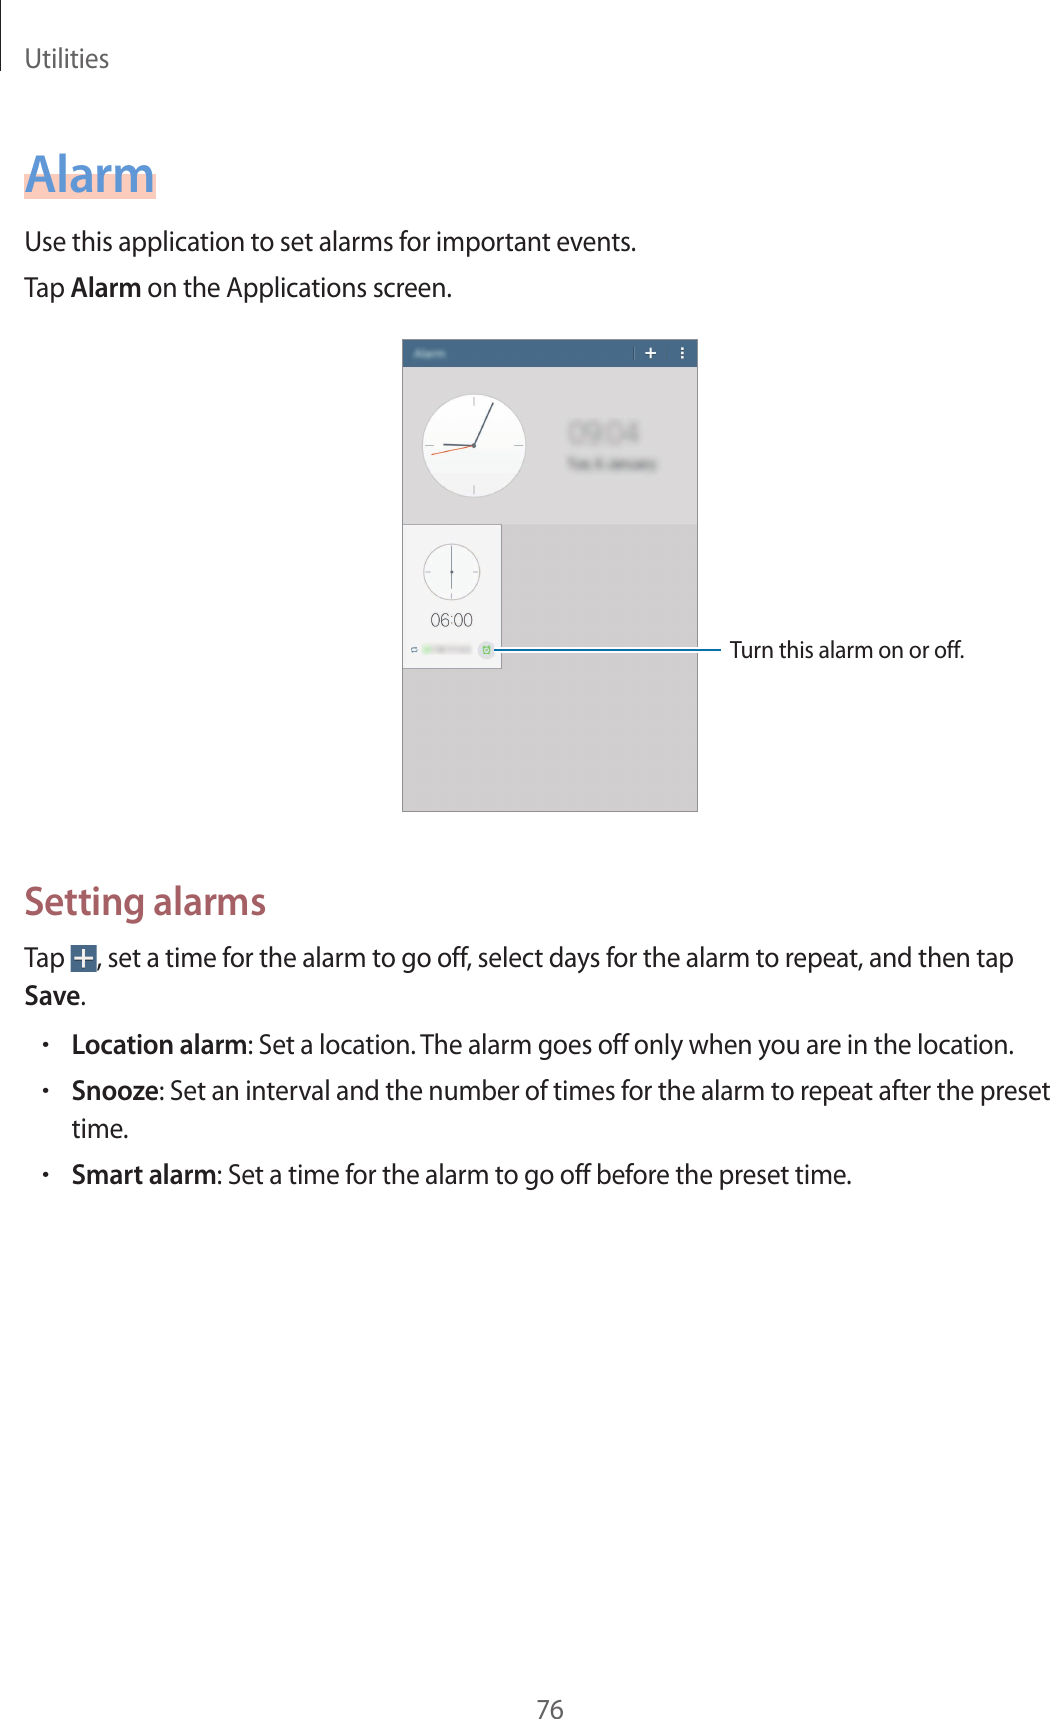 Utilities76AlarmUse this application to set alarms for important events.Tap Alarm on the Applications screen.Turn this alarm on or off.Setting alarmsTap  , set a time for the alarm to go off, select days for the alarm to repeat, and then tap Save.•Location alarm: Set a location. The alarm goes off only when you are in the location.•Snooze: Set an interval and the number of times for the alarm to repeat after the preset time.•Smart alarm: Set a time for the alarm to go off before the preset time.